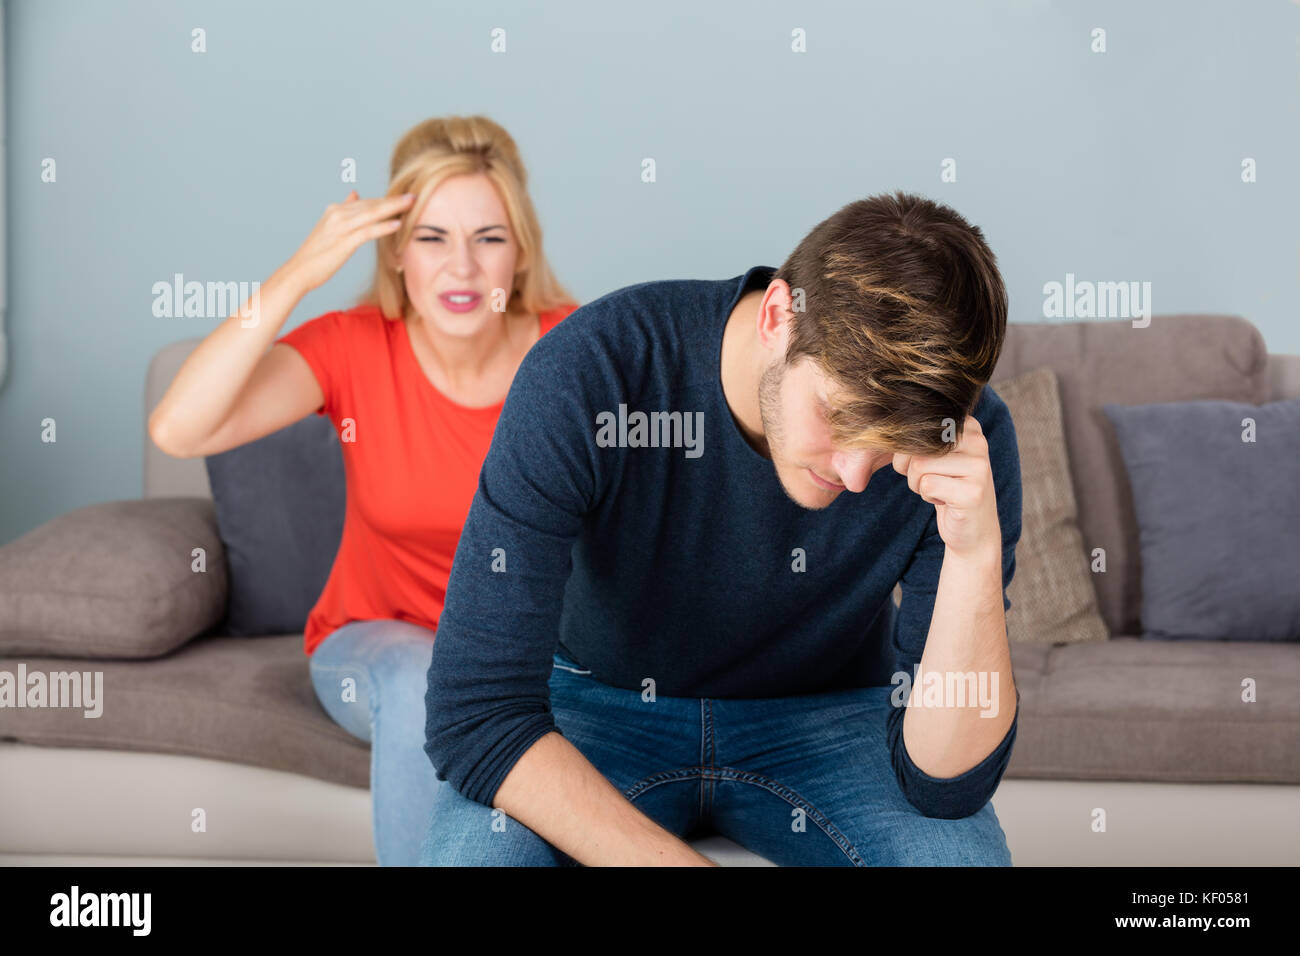 Unhappy Young Woman Sitting On Couch Having Arguing And Quarreling With Man At Home Stock Photo